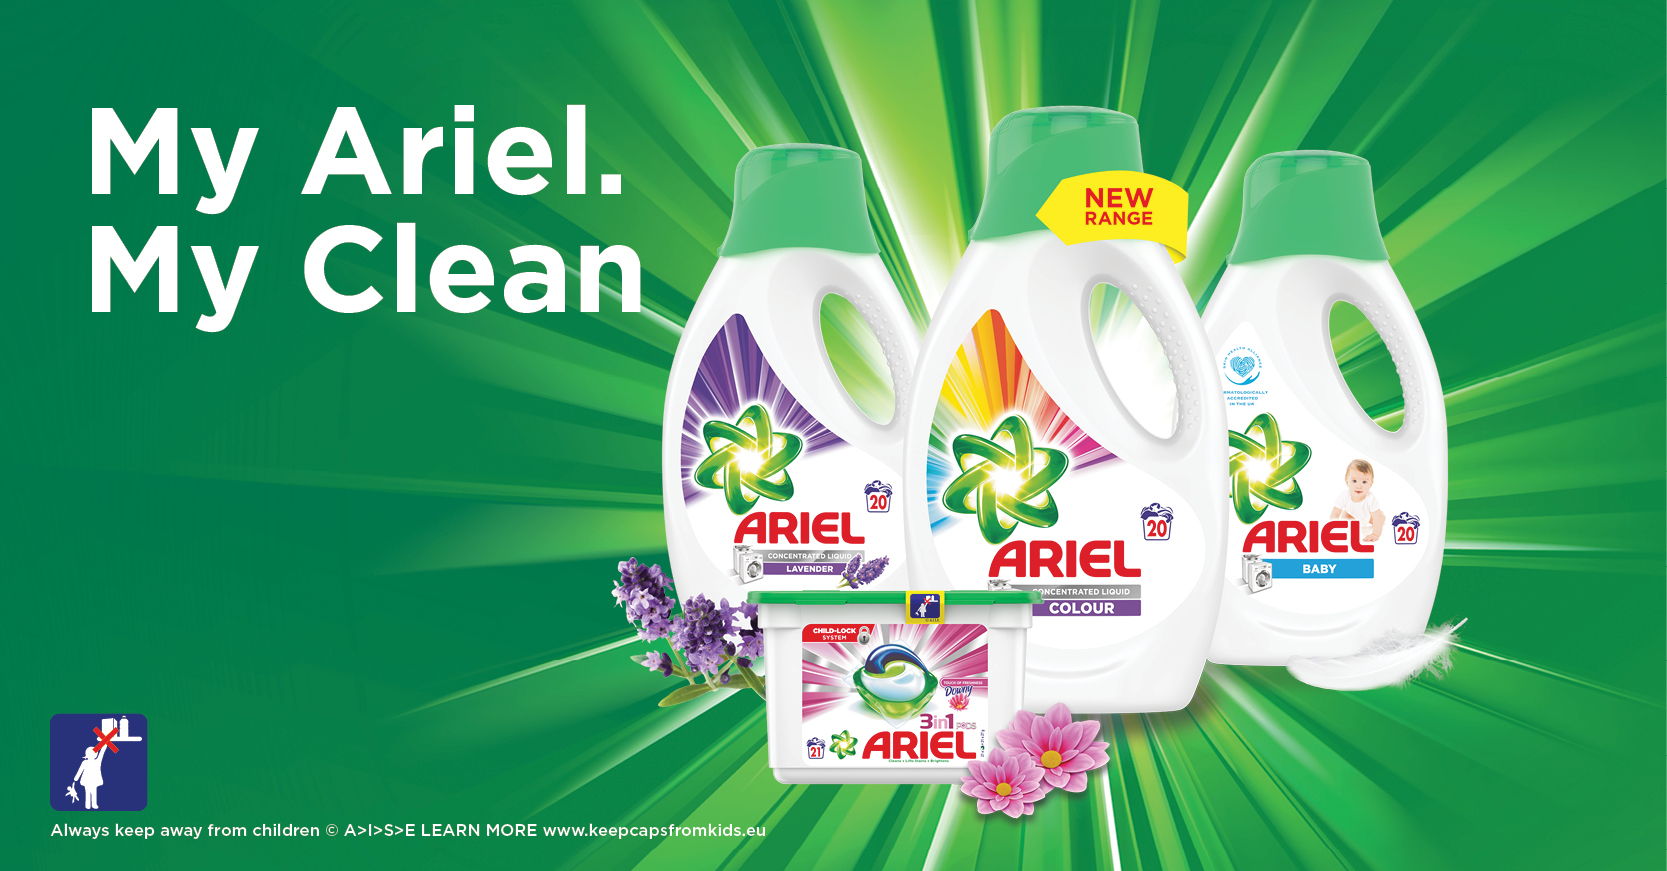 Choose your “CLEAN” with Ariel’s new range of detergents designed to cater for your laundry needs